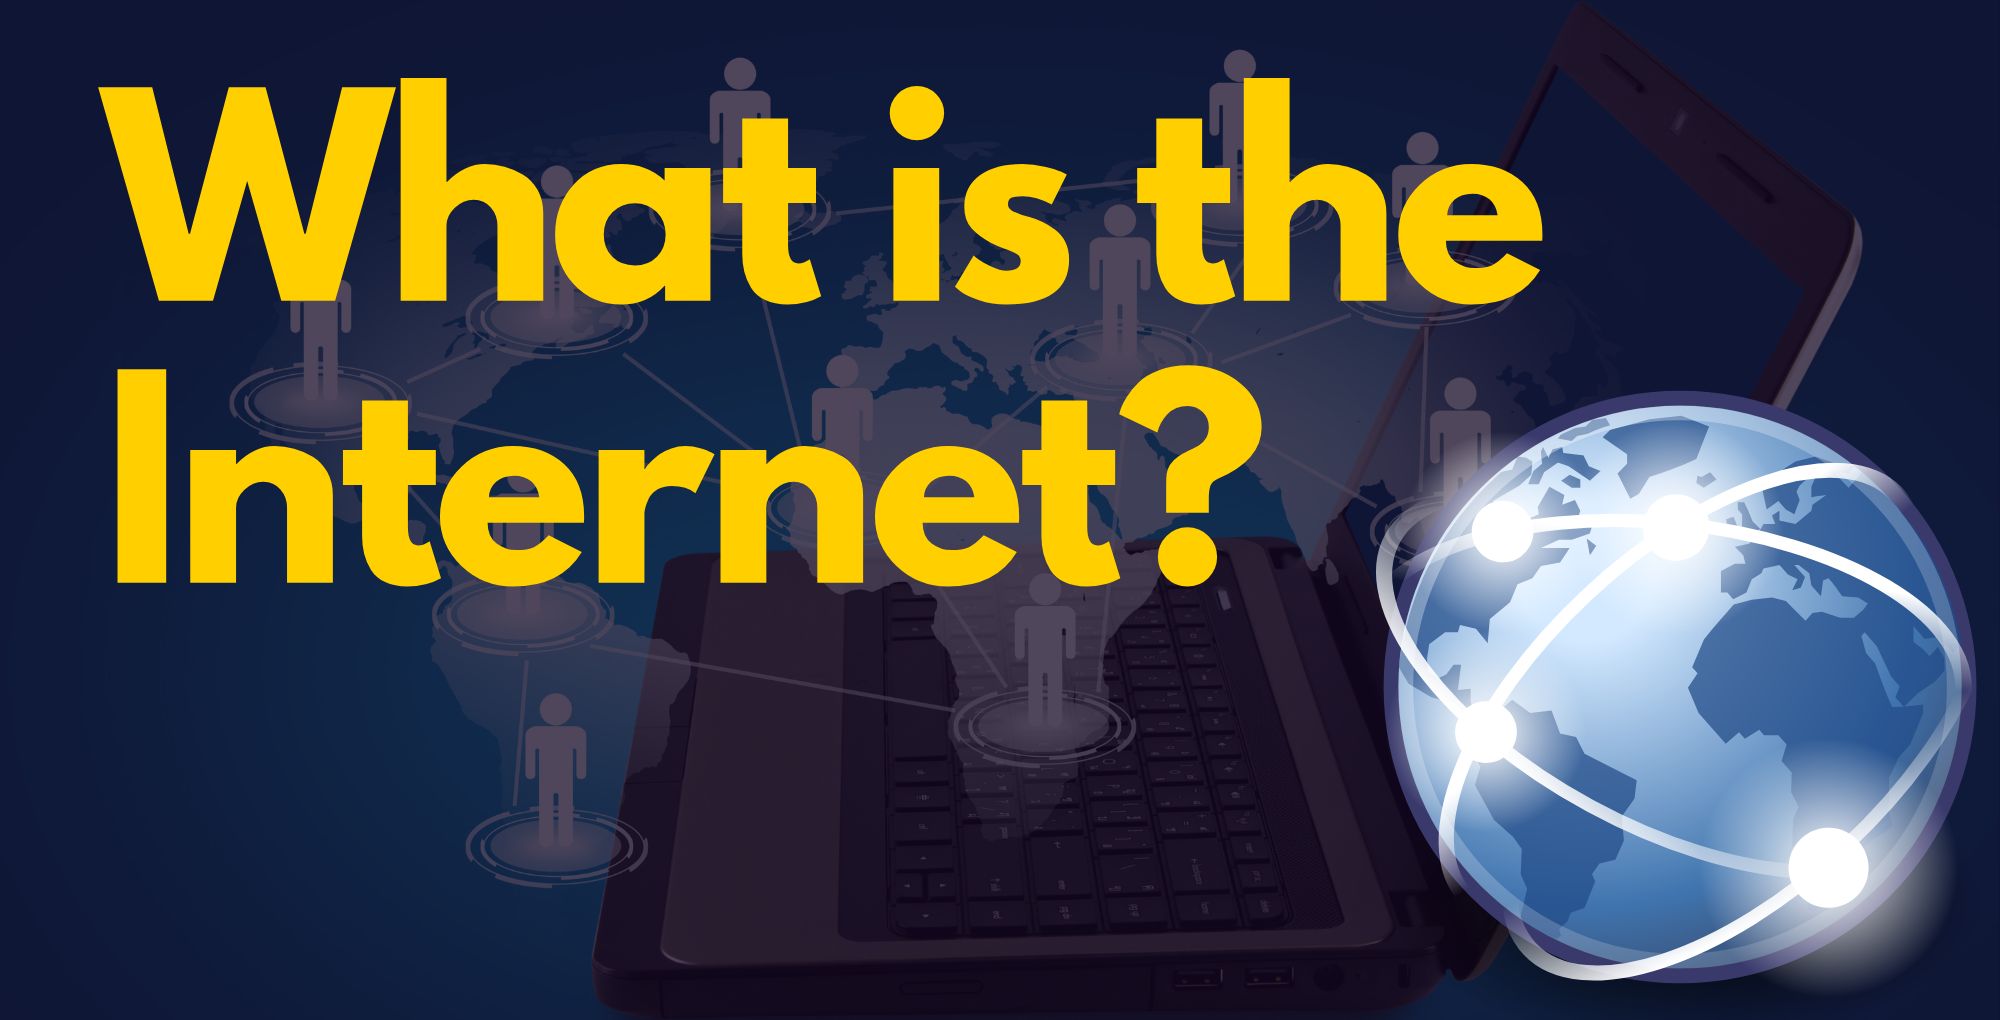 What is the Internet? All the unknown information of the Internet.